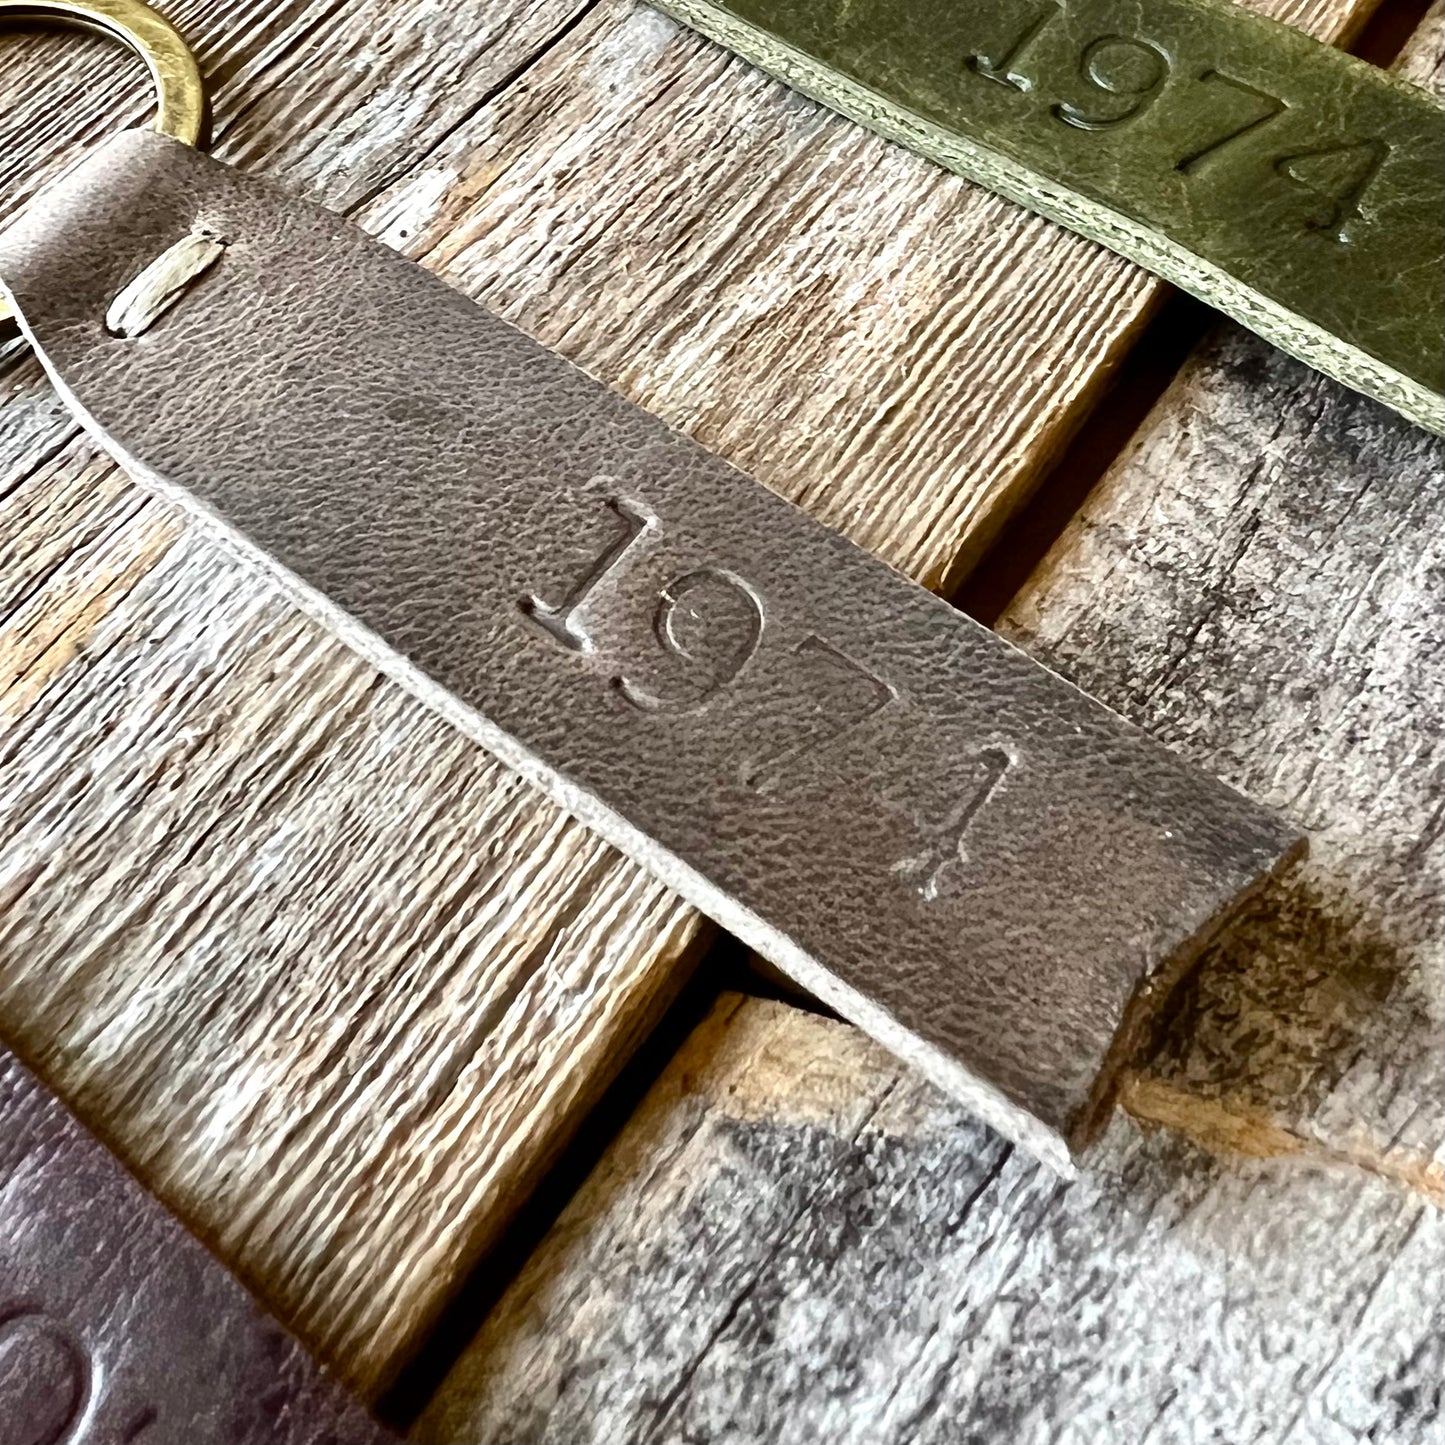 1974 Branded Leather Key Fob in Smoke